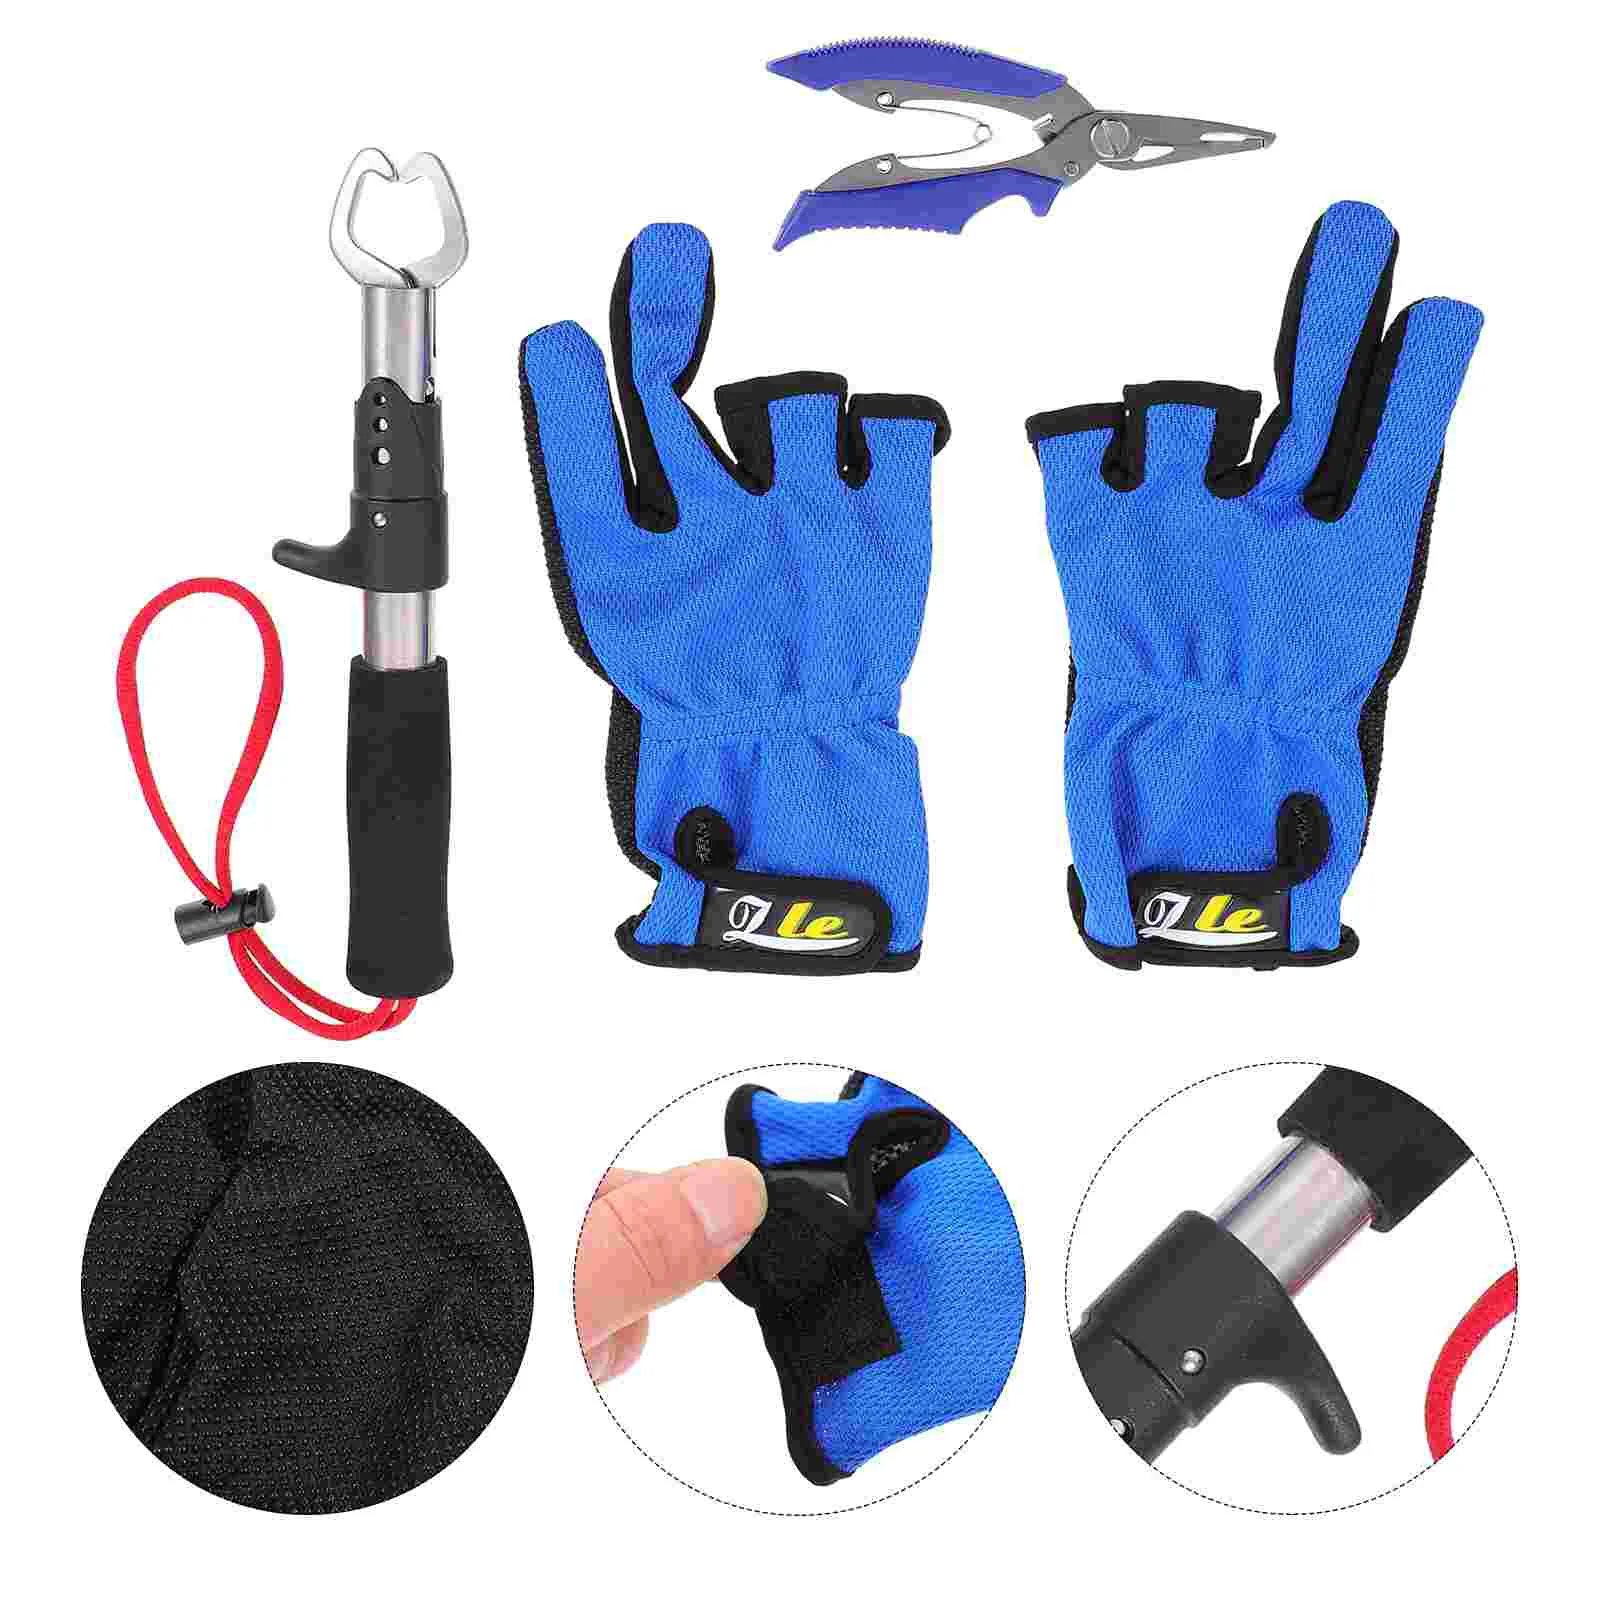 

Pliers Tool Tackle Controller Stainless Steel Ulti Functional Practical Kit Clamp Accessory Line Scissor Pocket knife